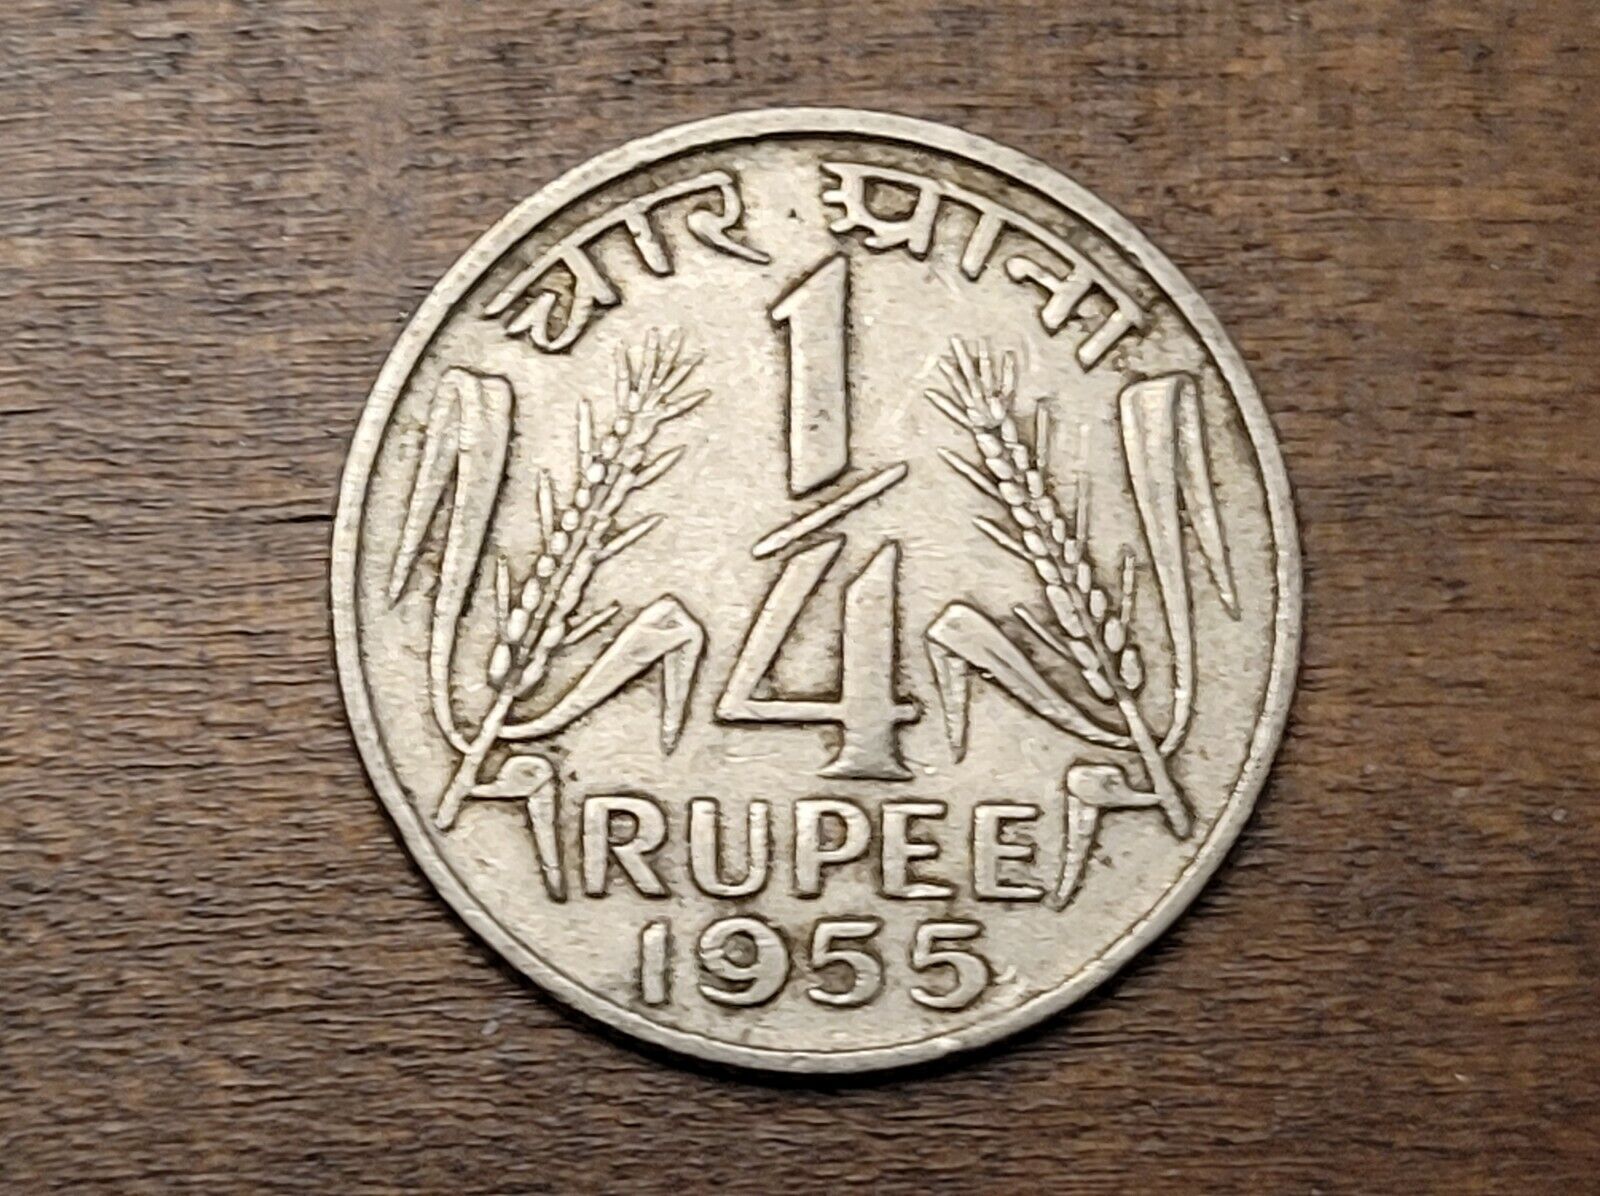 1955 India 1/4 Rupee Coin - FREE SHIPPING! - #187